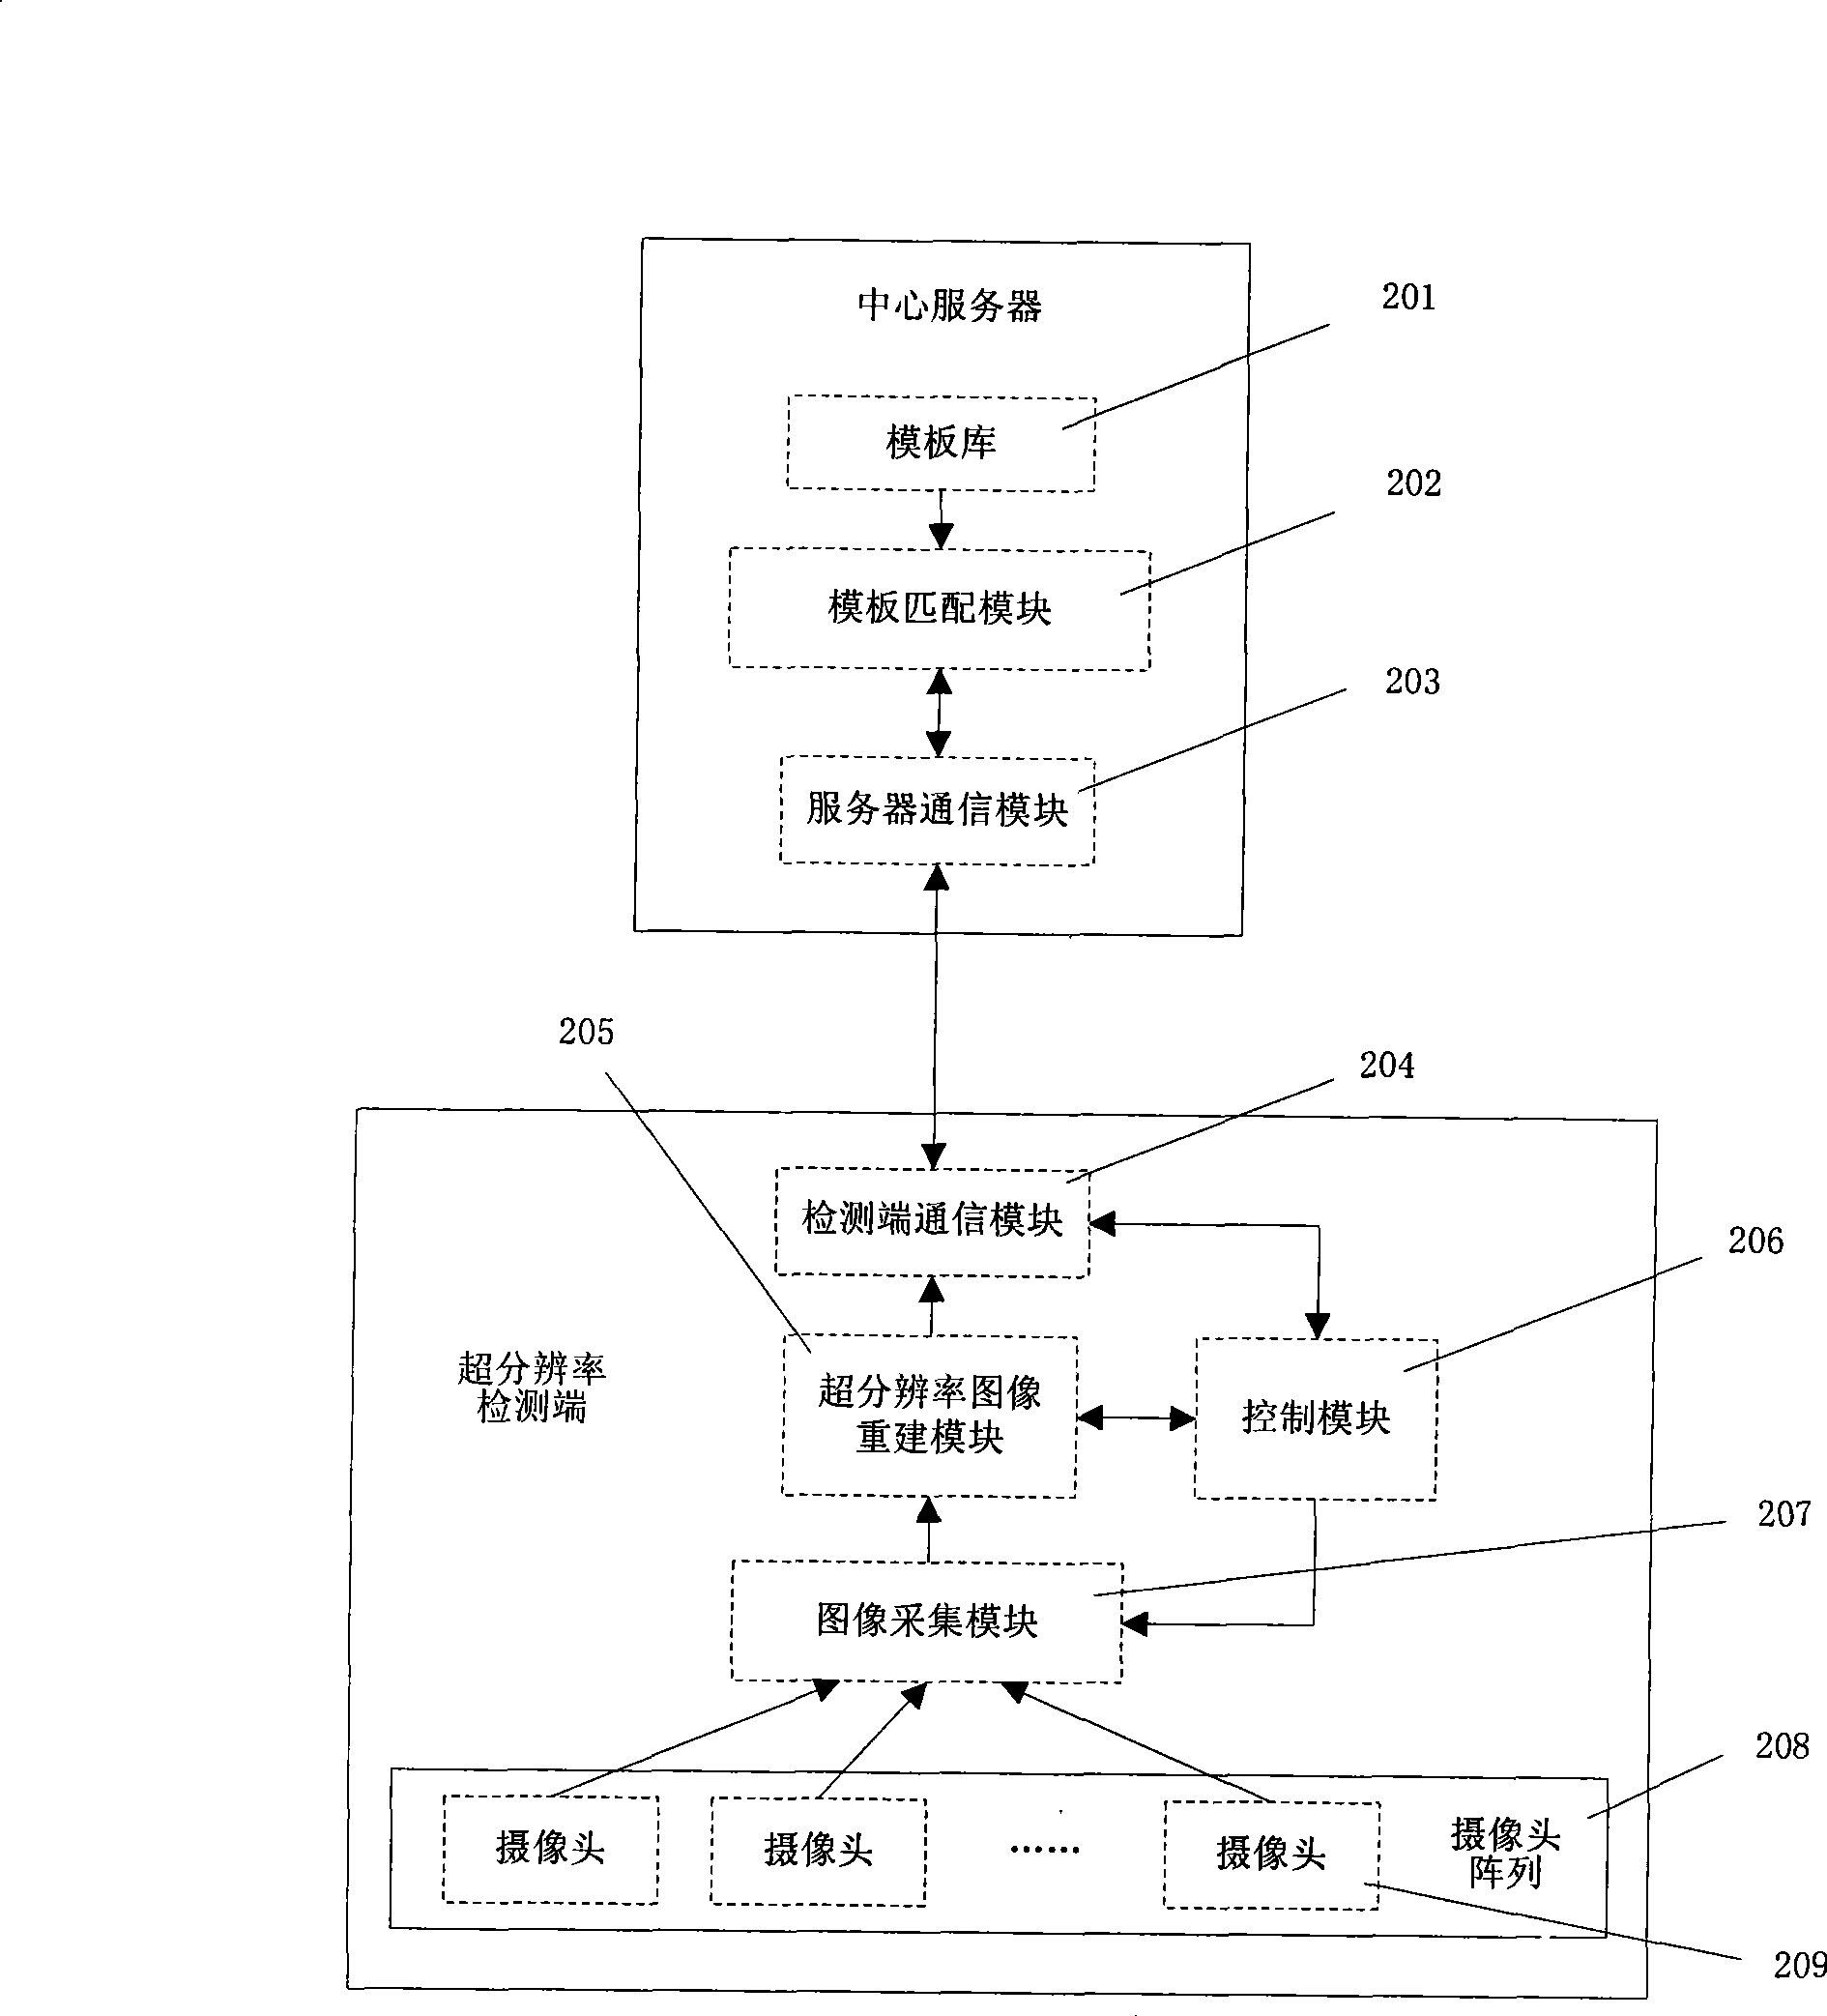 Circuit board element mounting/welding quality detection method and system based on super-resolution image reconstruction